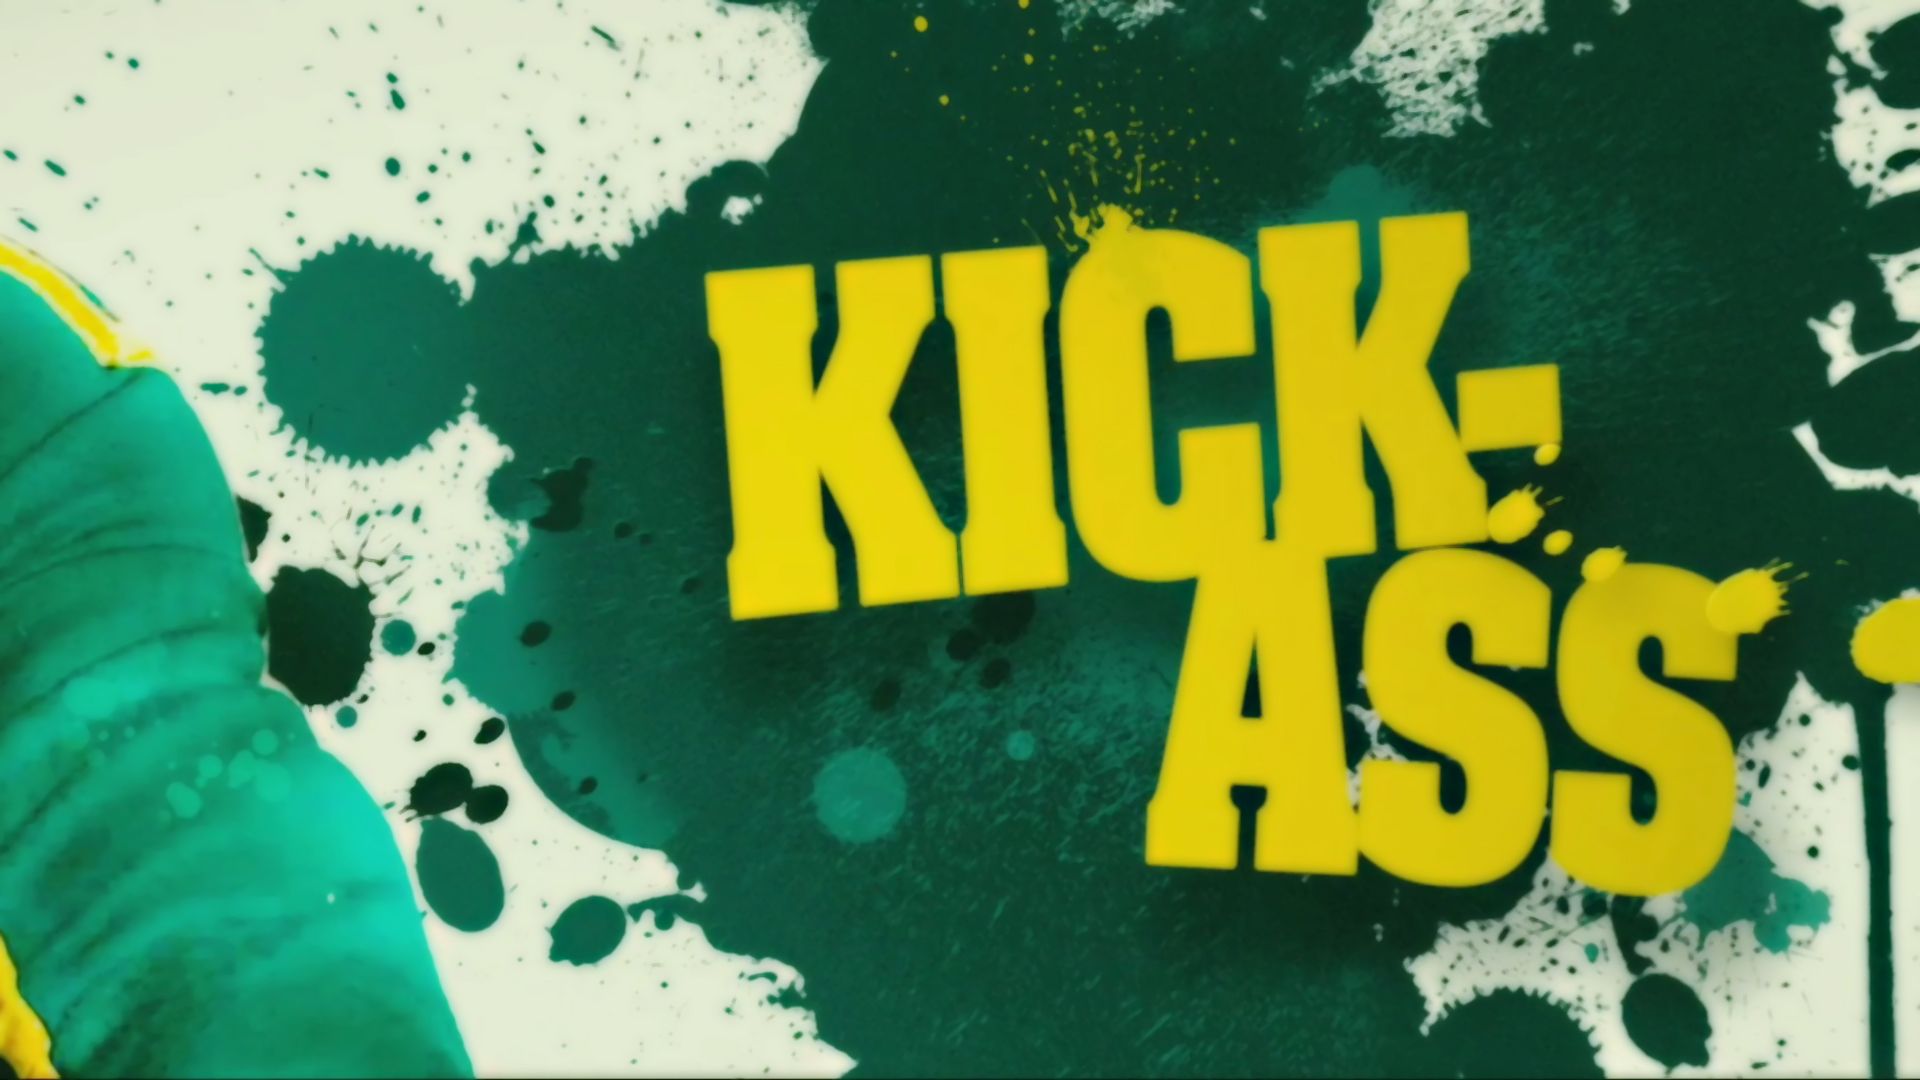 Kick Ass | Free Desktop Wallpapers for HD, Widescreen and Mobile